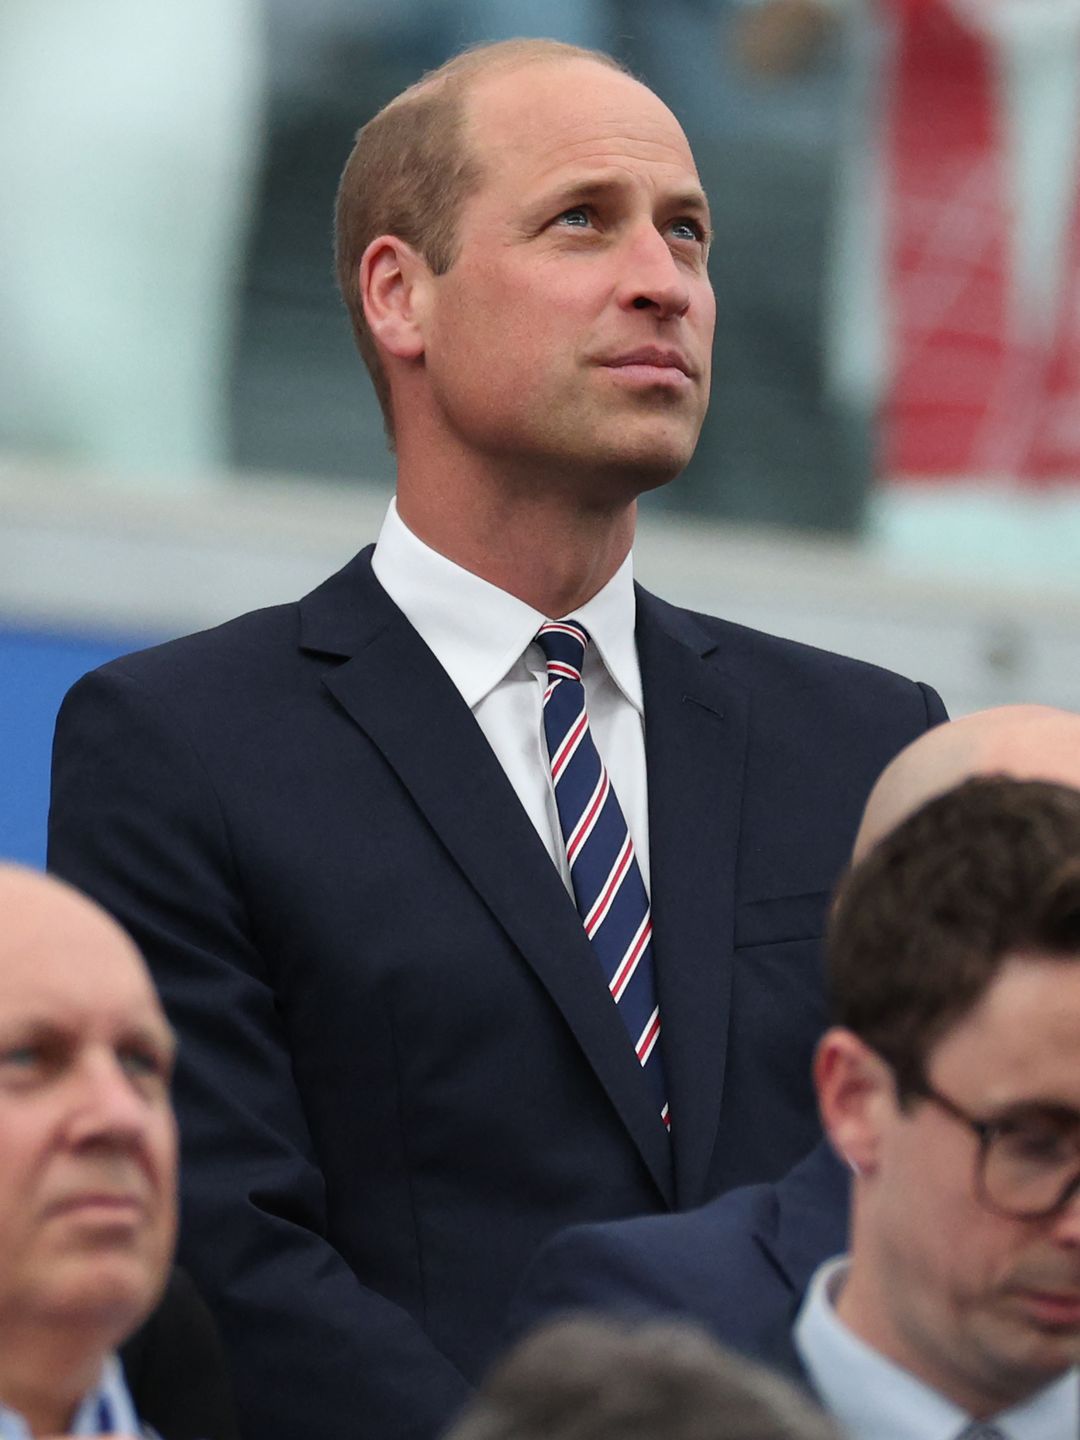 Prince William in a suit at football match